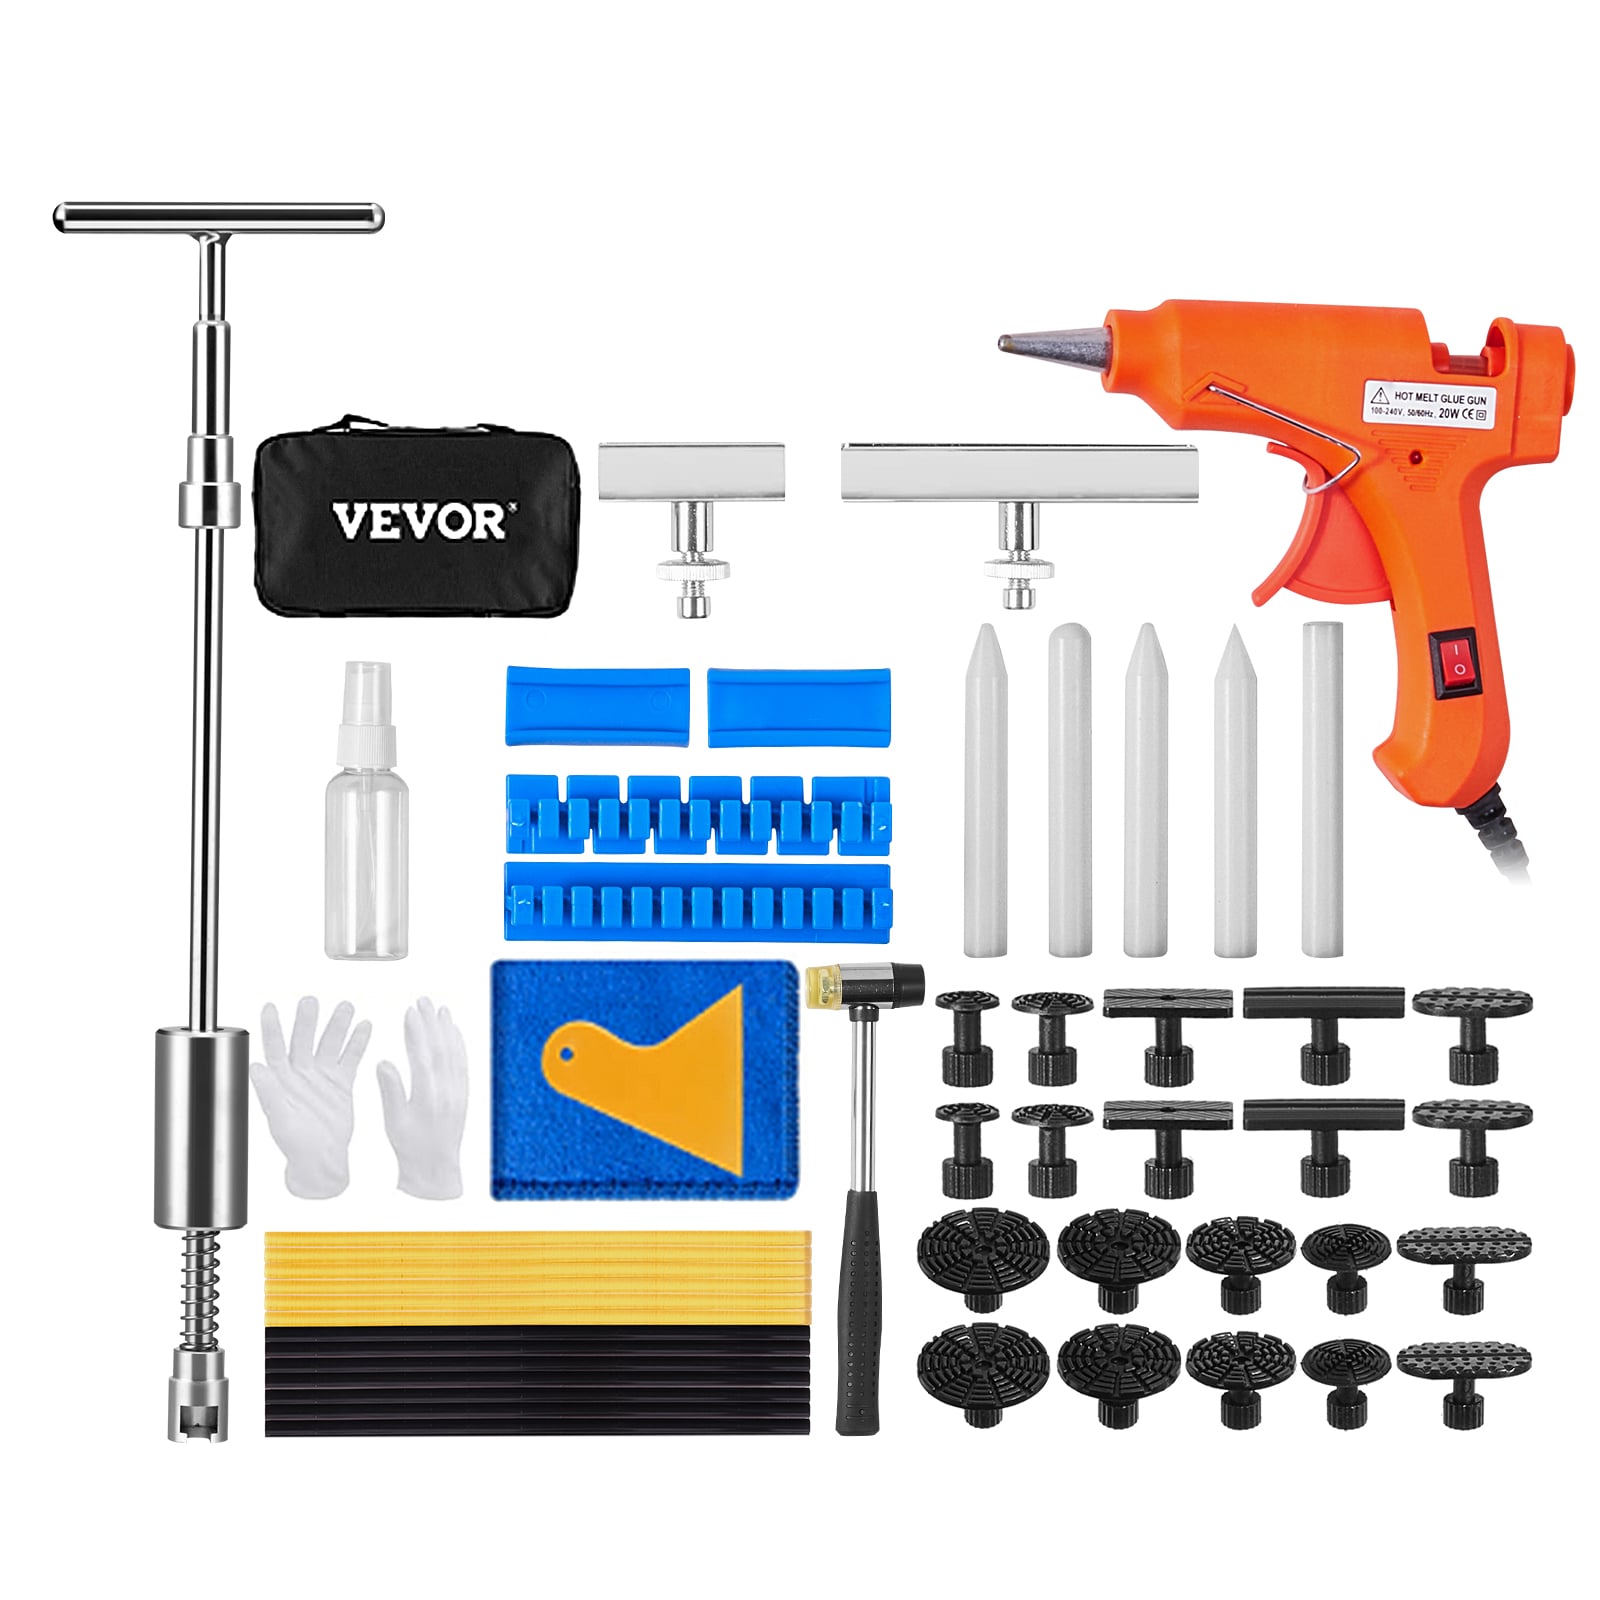 VEVOR 25 Pcs Dent Repair Kit, Paintless Dent Removal Kit with Bridge Puller and Puller Tabs, Auto Body Dent Puller Kit with Hot Glue Gun, Glue Sticks